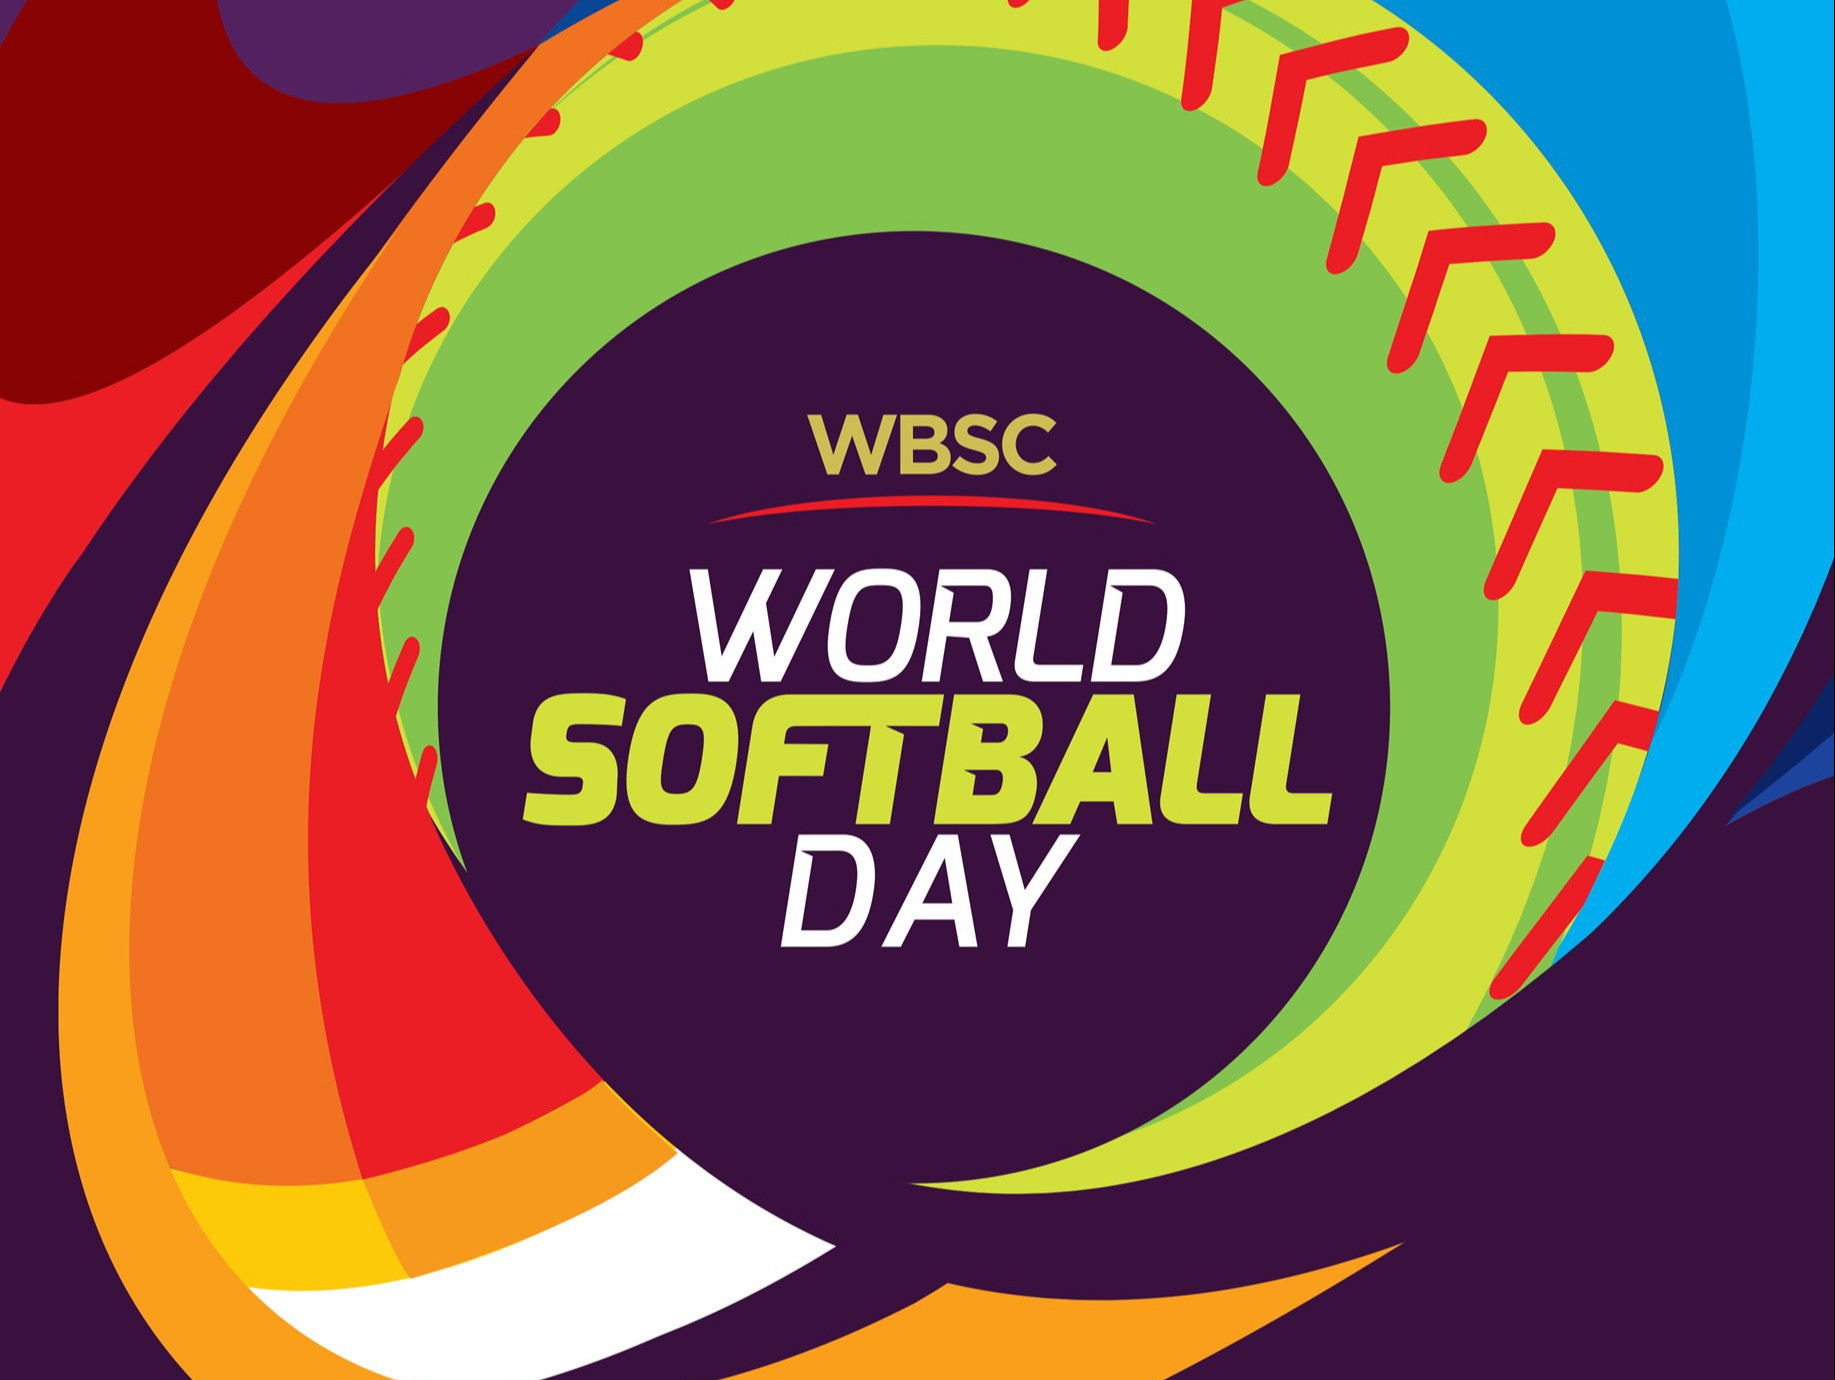 WBSC pays tribute to the late Don Porter on World Softball Day